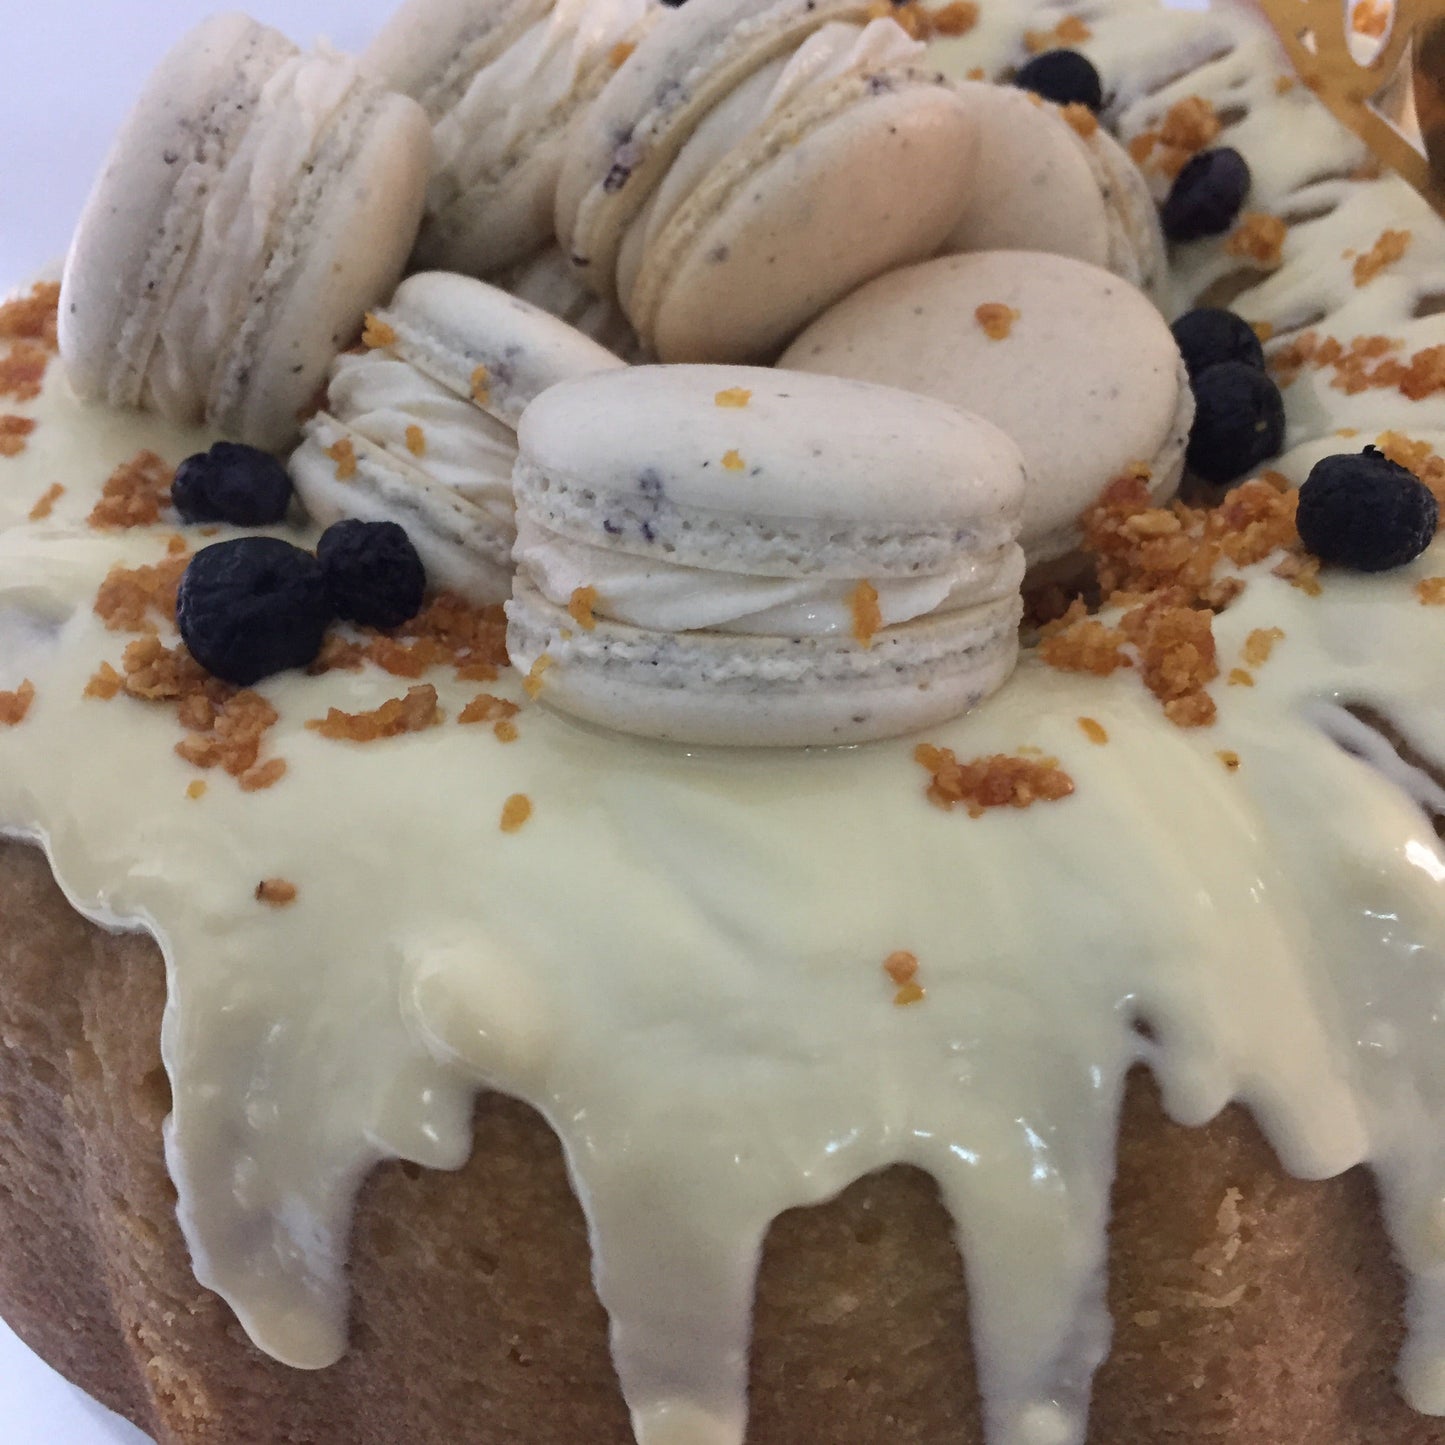 “How do you want it?”: Build Your Own Premium Bundt Cake